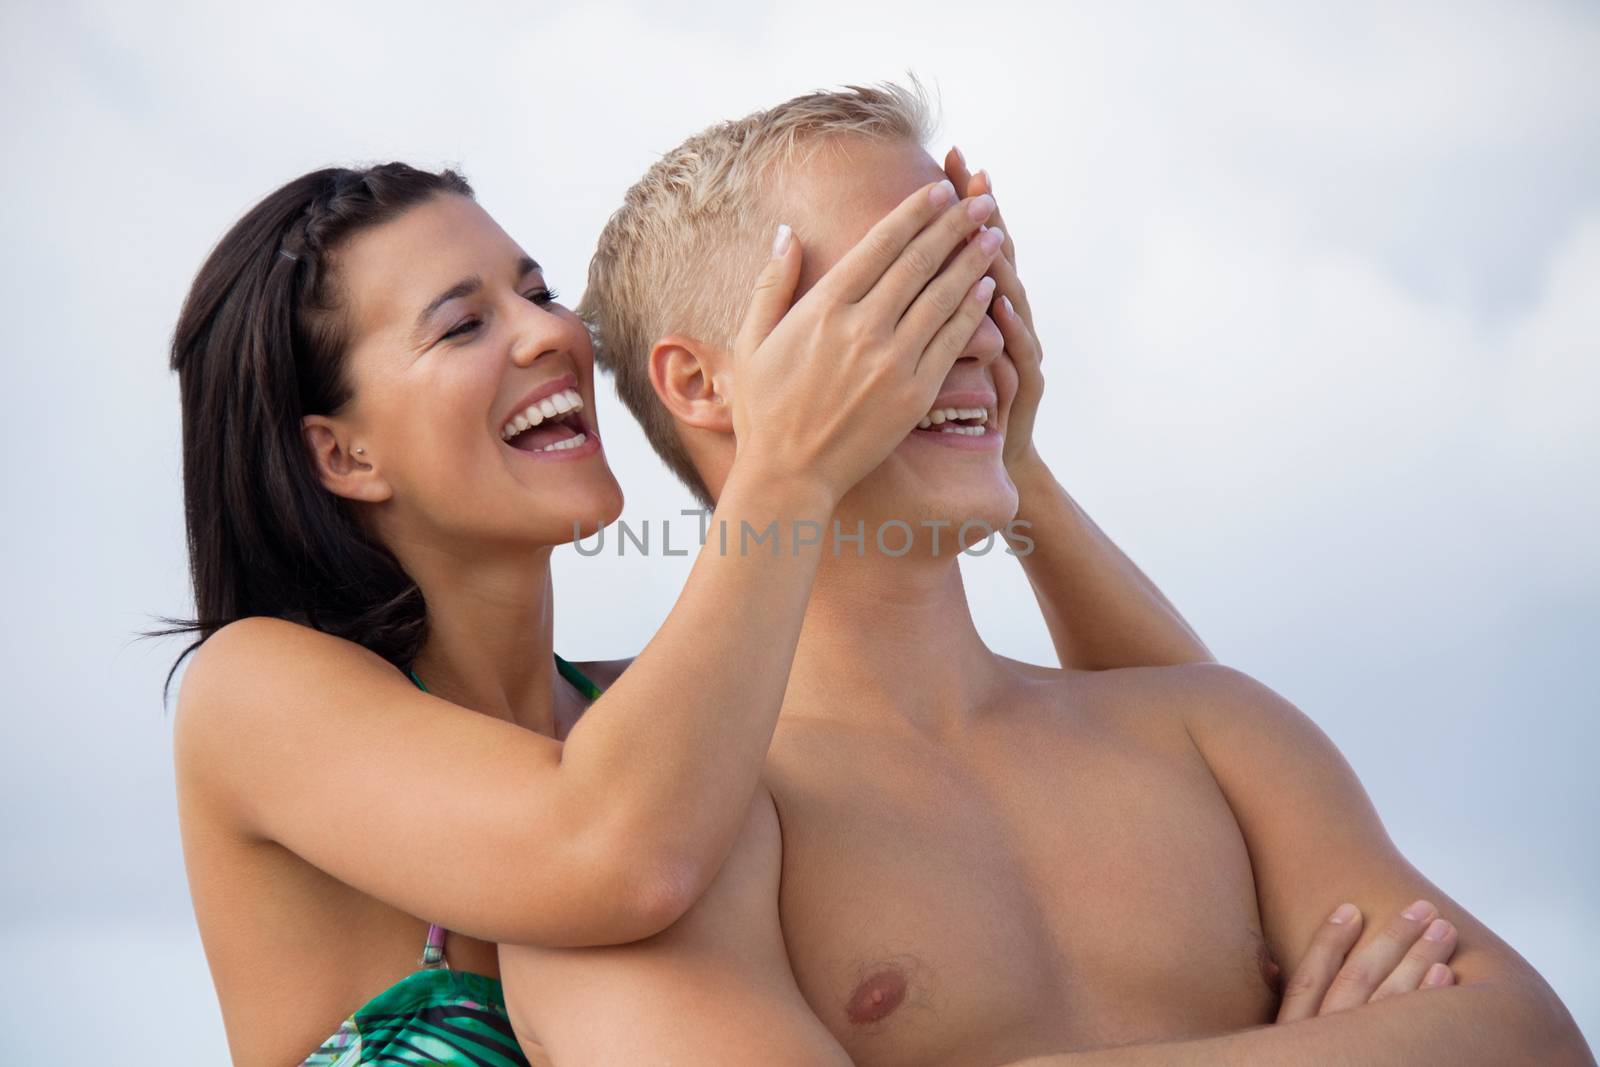 smiling young couple having fun in summer on the beach